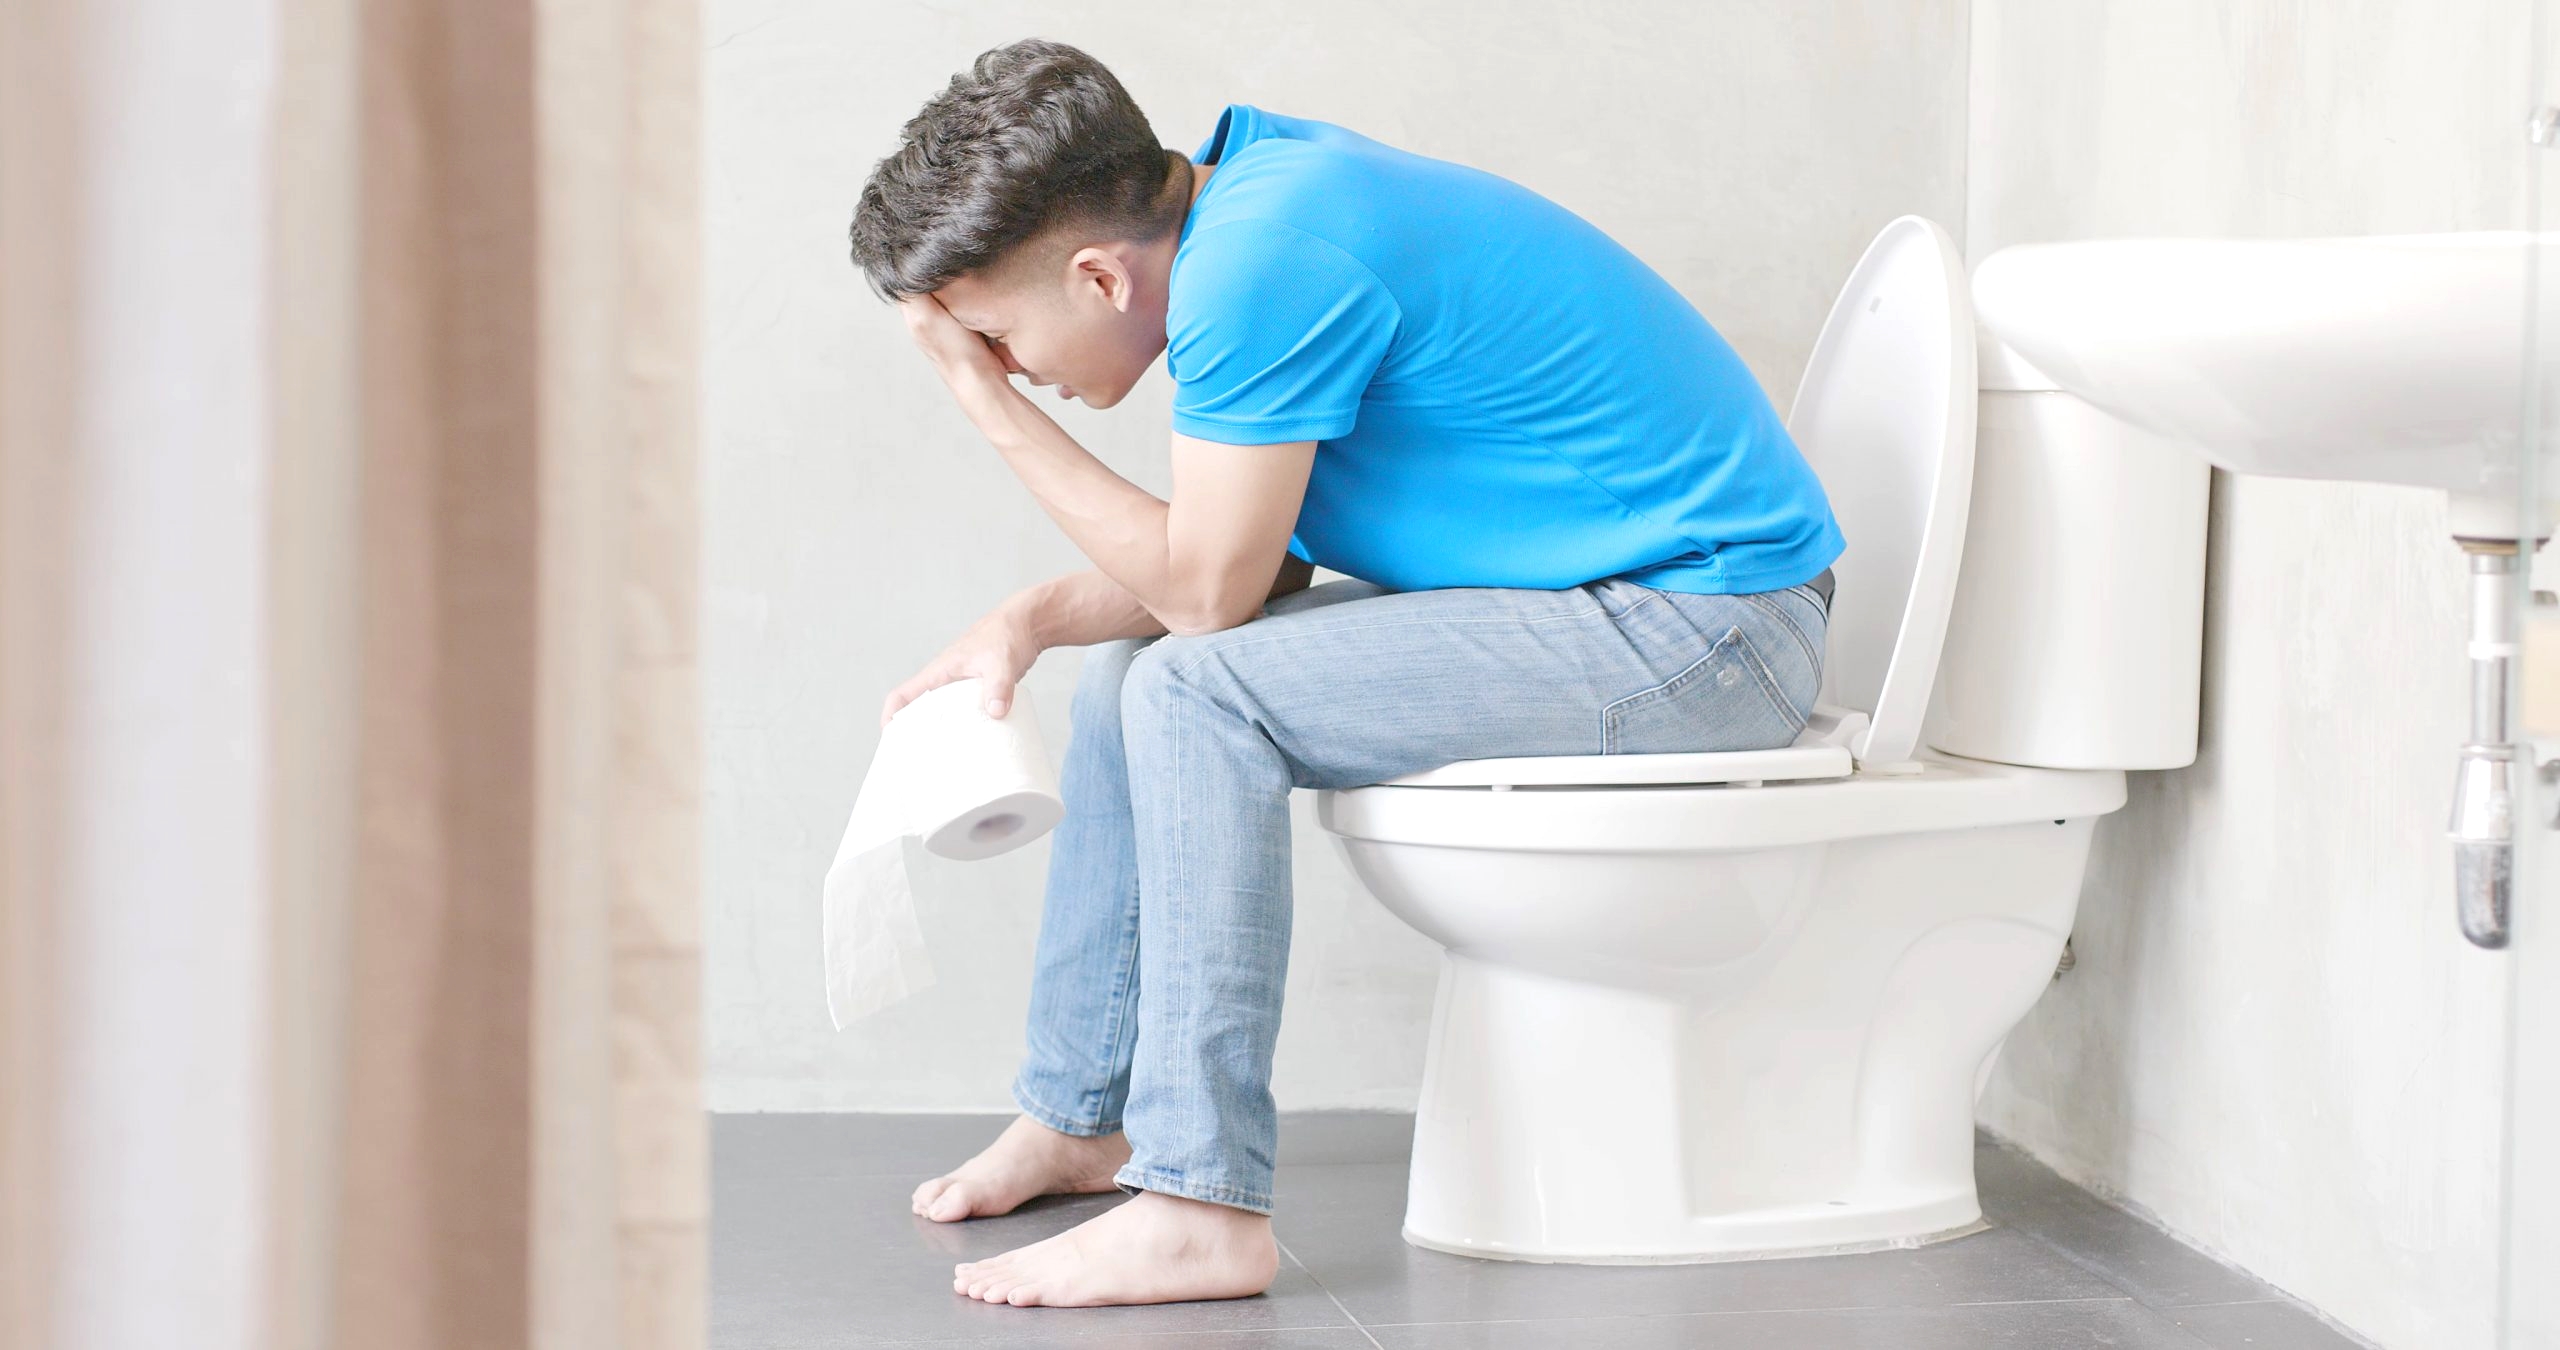 10 Best Effective Home Remedies for Constipation